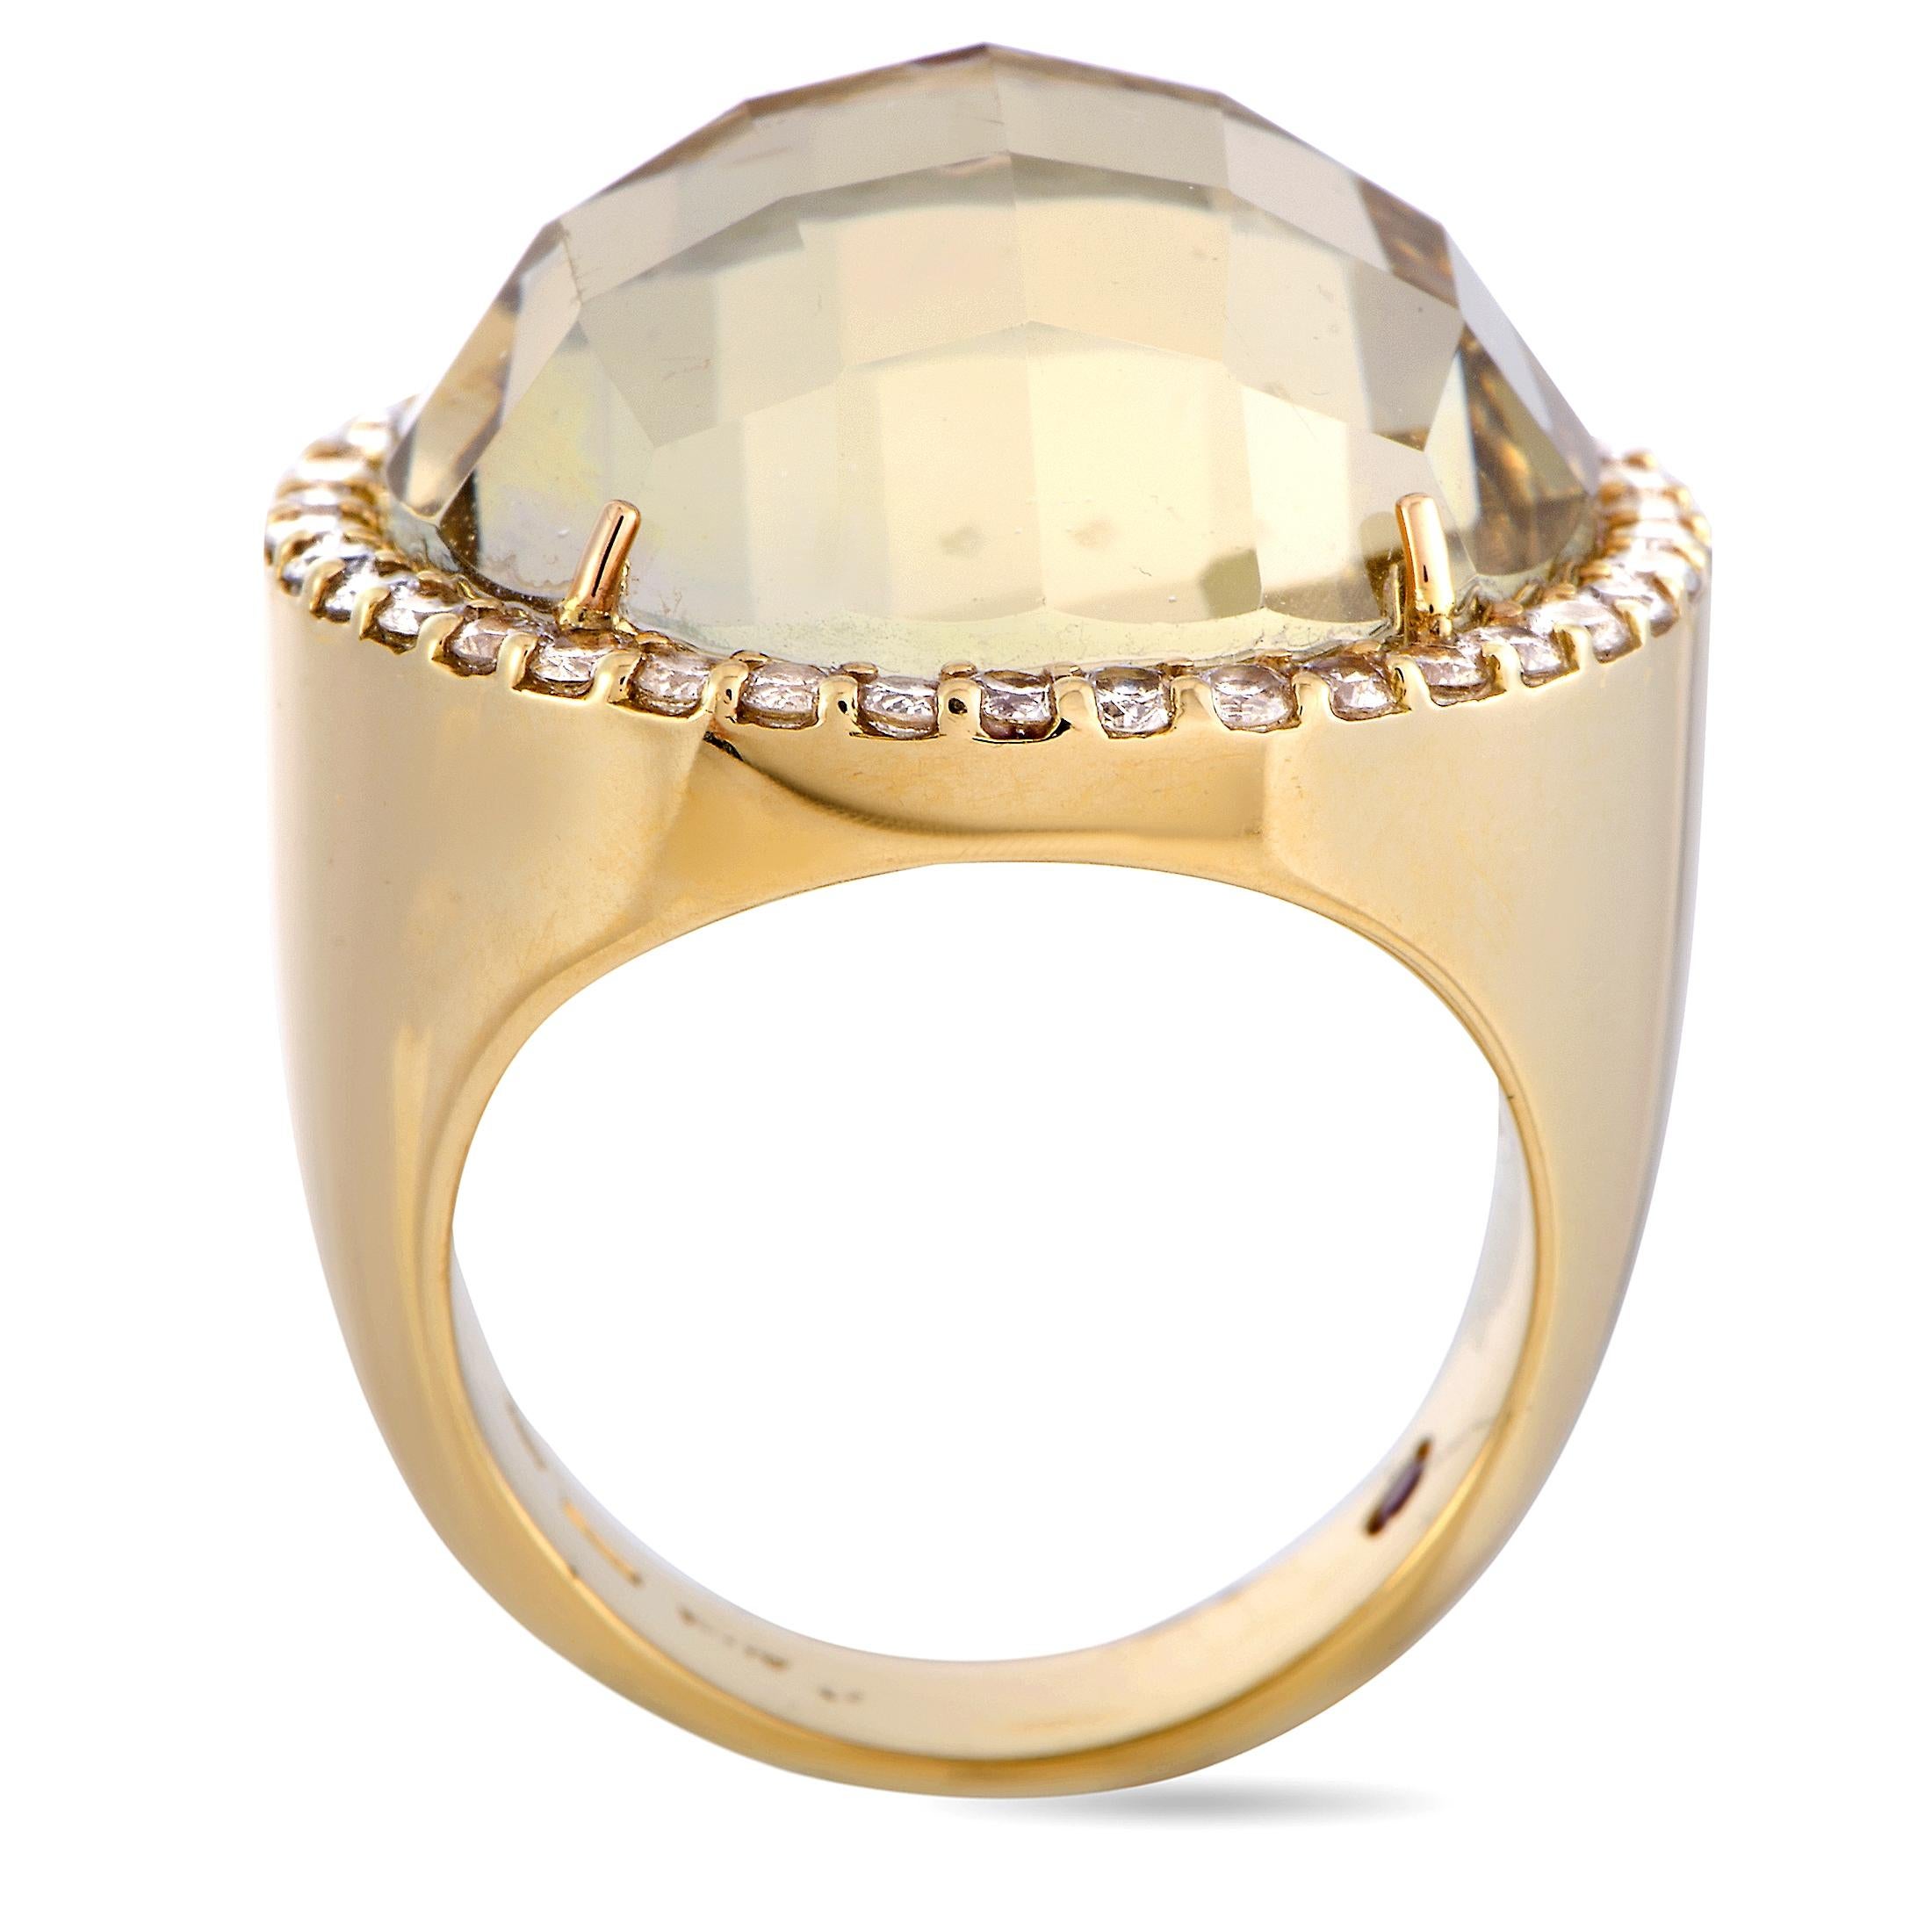 This Roberto Coin ring is crafted from 18K yellow gold and set with a 23.00 ct rutilated quartz and a total of 0.95 carats of diamonds. The ring weighs 22.5 grams, boasting band thickness of 4 mm and top height of 11 mm, while top dimensions measure